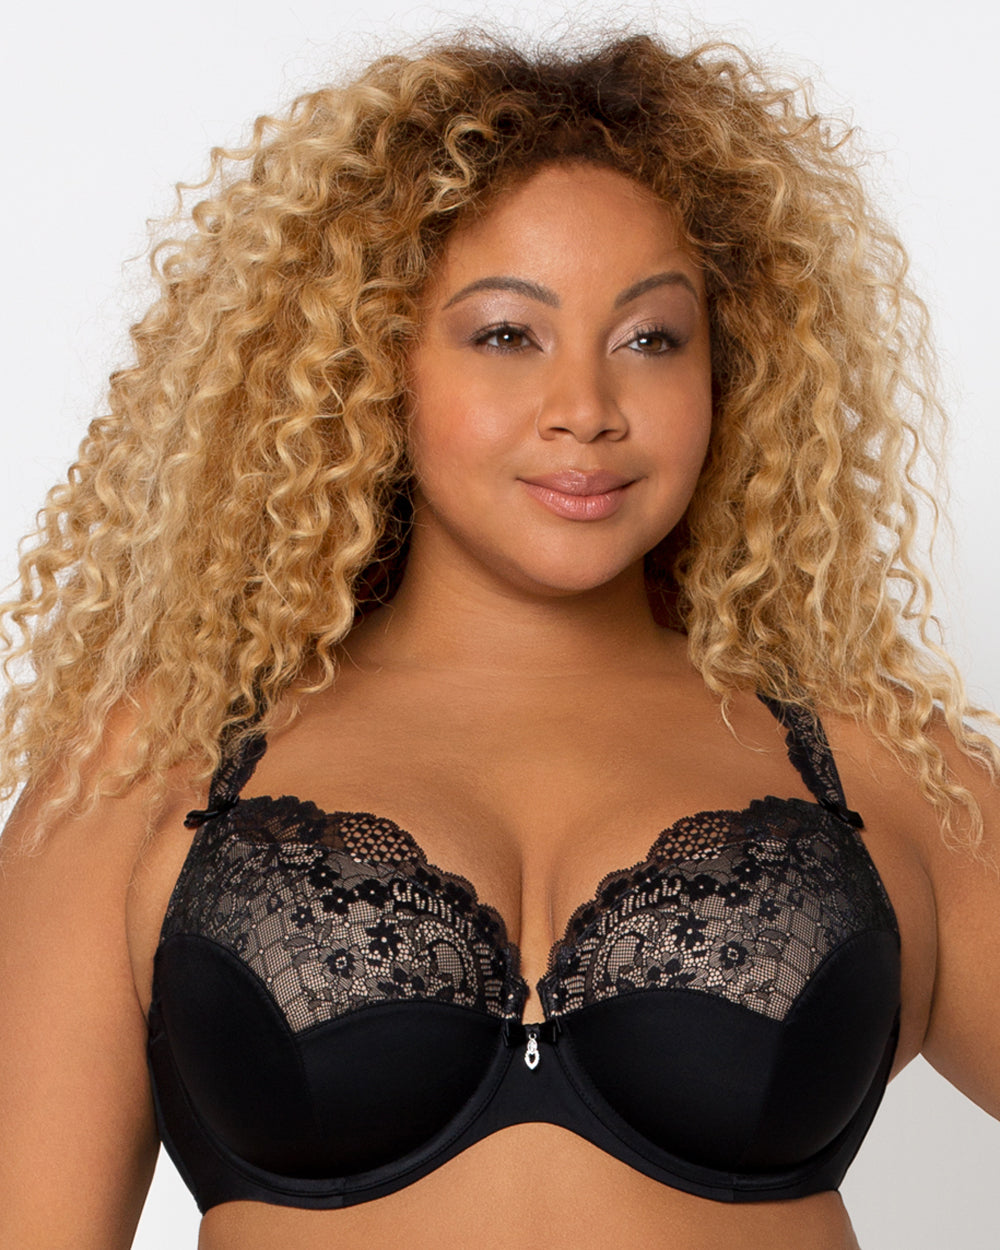 Lace Bras for Women Plus Size Push Up Bra For Bras None Underwire